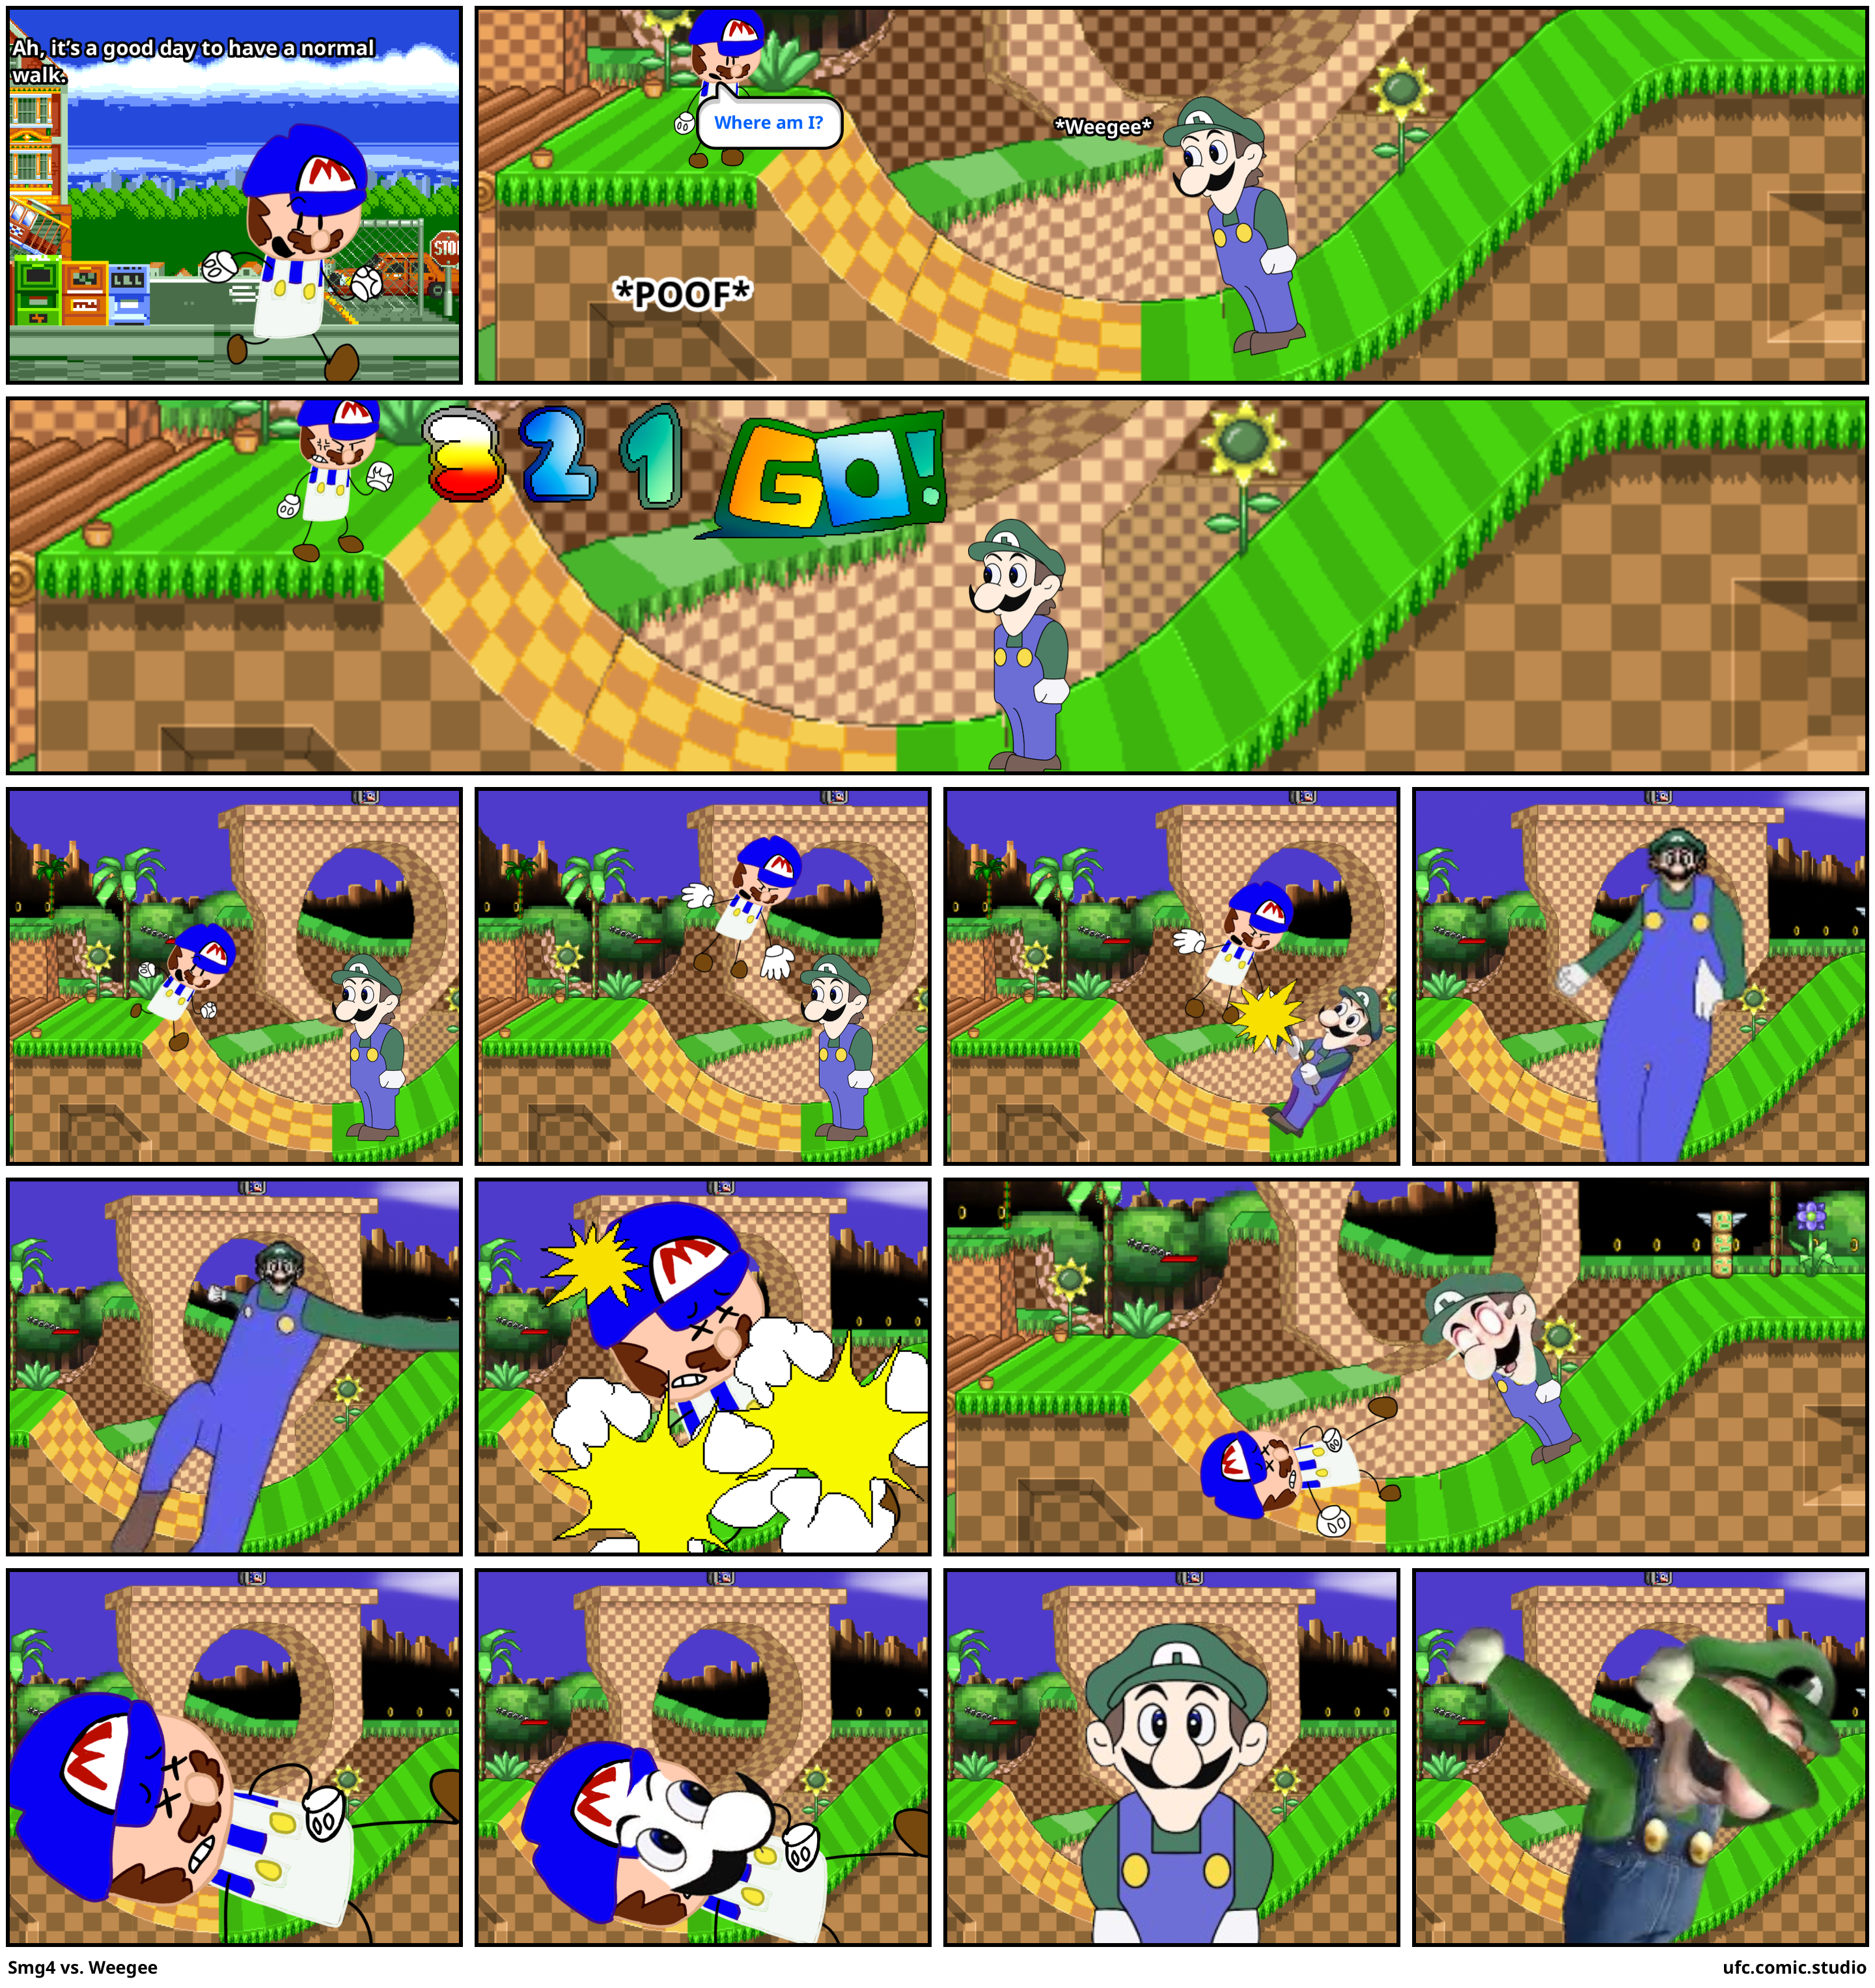 Smg4 vs. Weegee